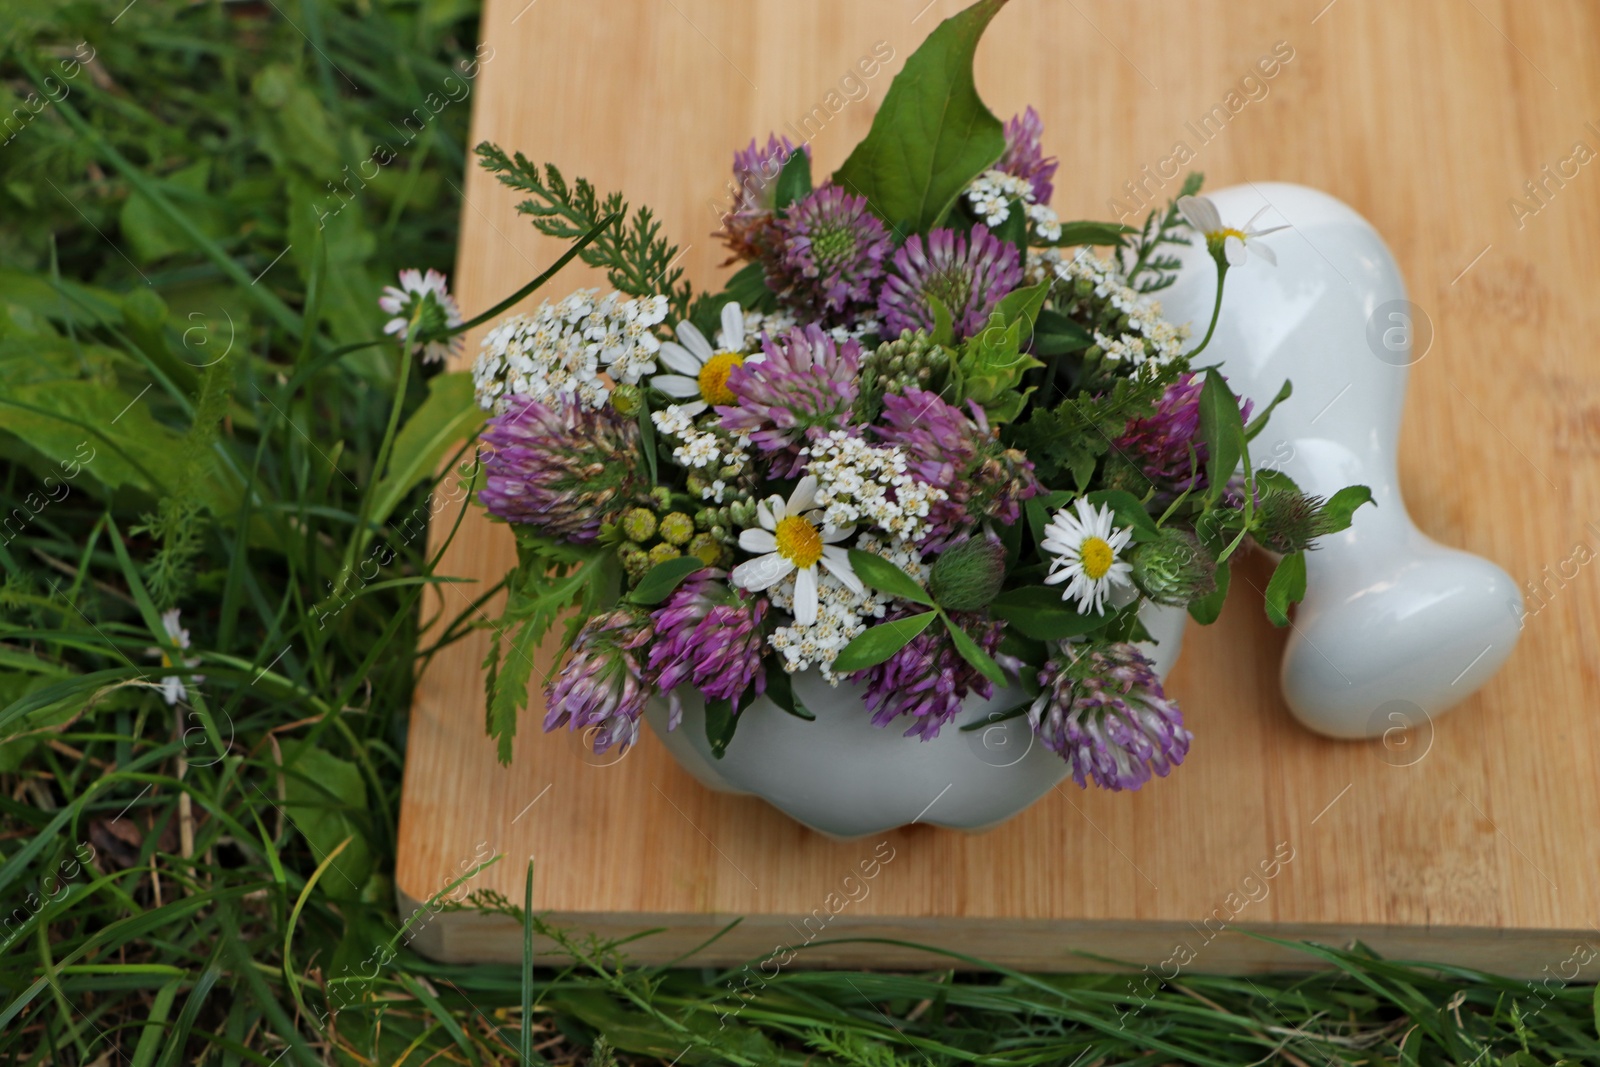 Photo of Ceramic mortar with pestle, different wildflowers and herbs on green grass, above view